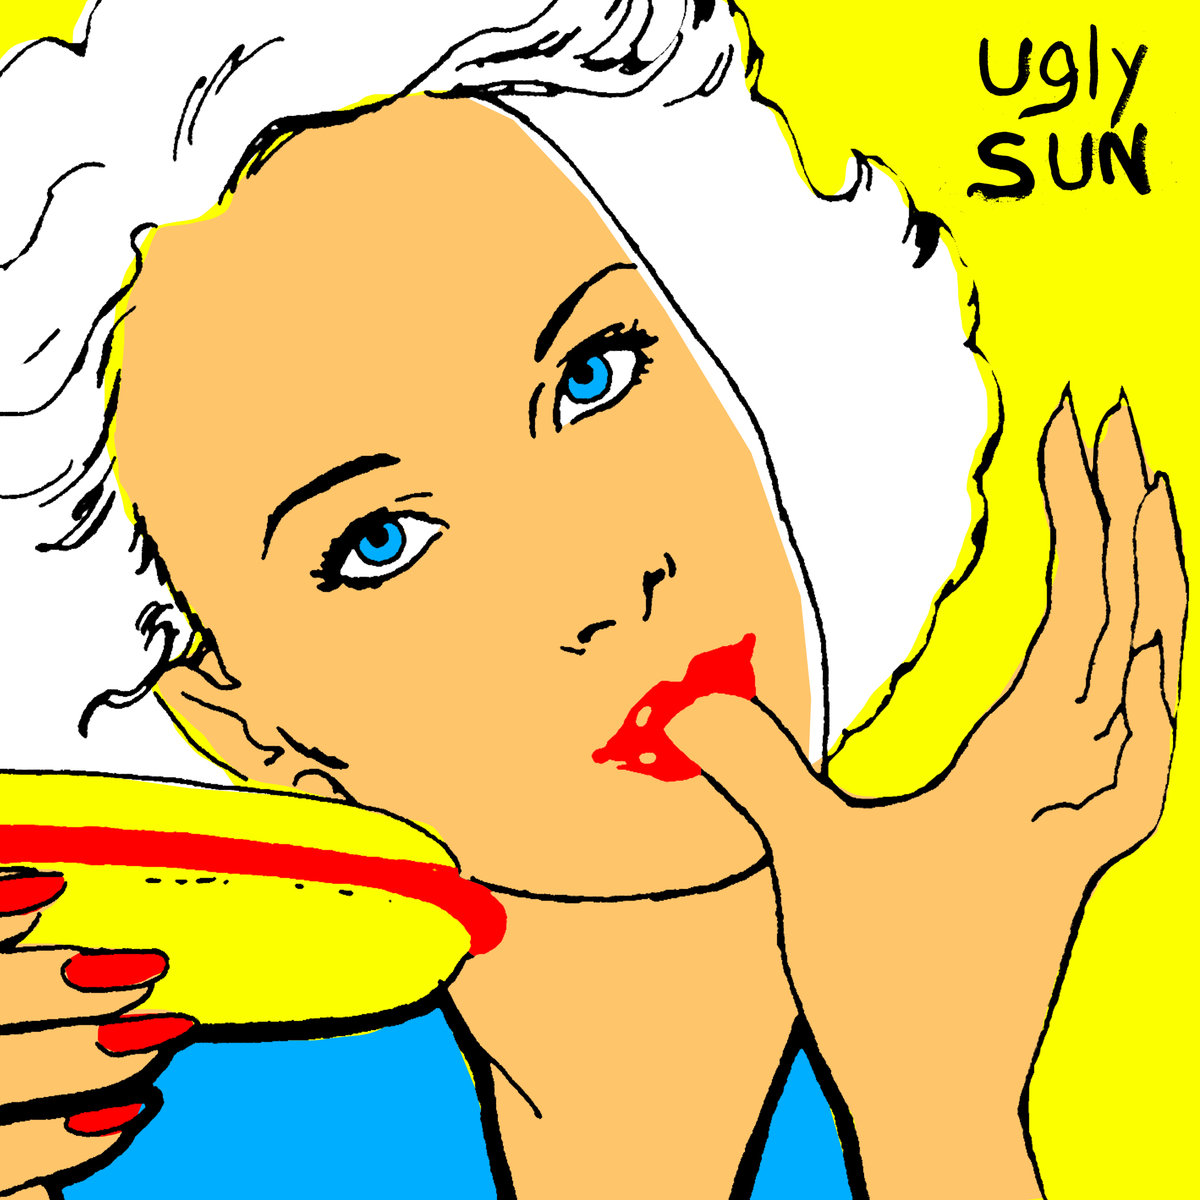 Ugly Sun – Painted Post